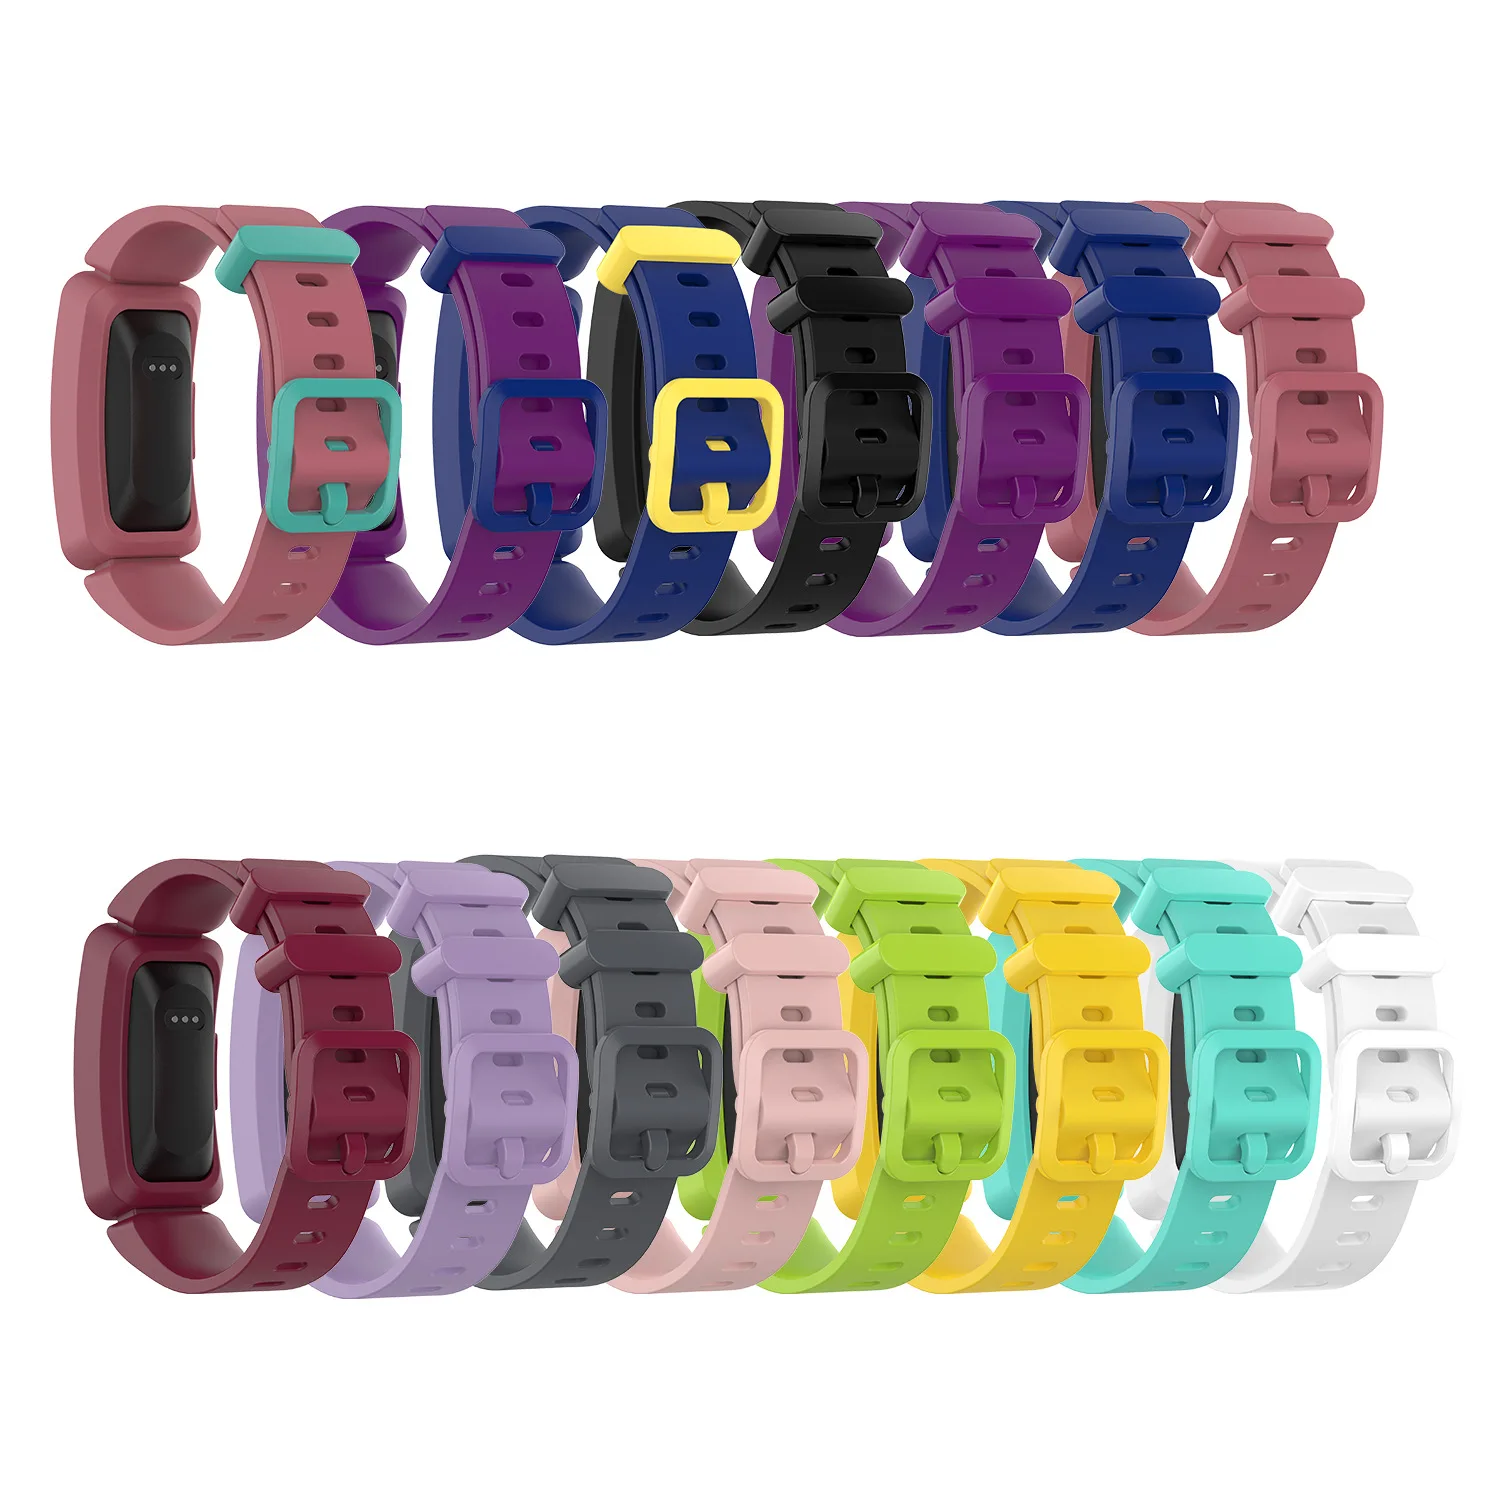 

Silicone smart band watch For Fitbit ace 2 inspire HR Replacement Accessory Bracelet band straps factory direct